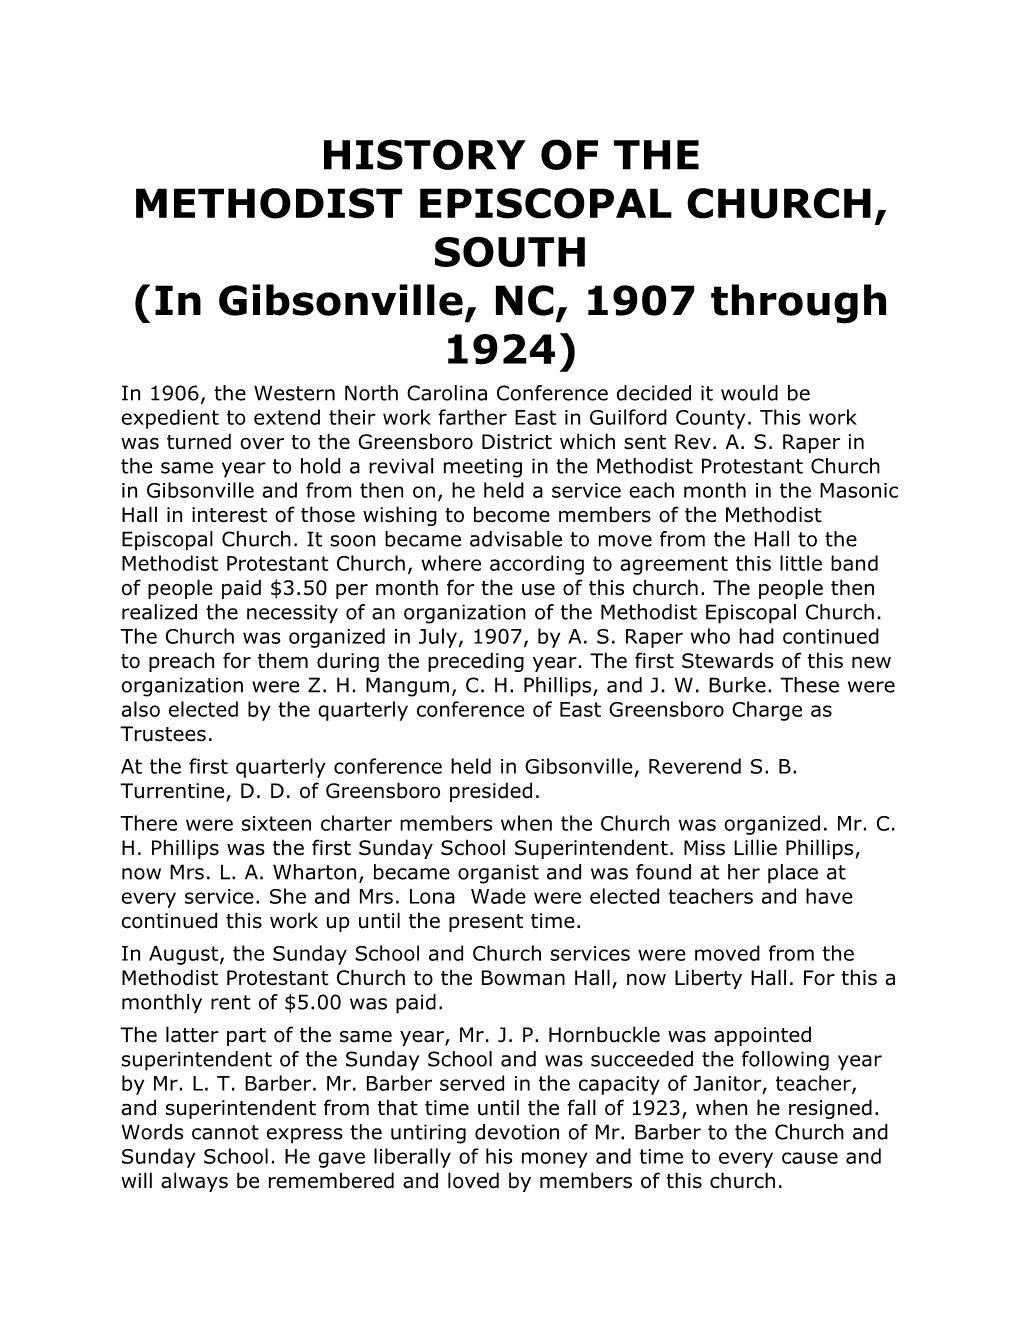 HISTORY of the METHODIST EPISCOPAL CHURCH, SOUTH (In Gibsonville, NC, 1907 Through 1924)